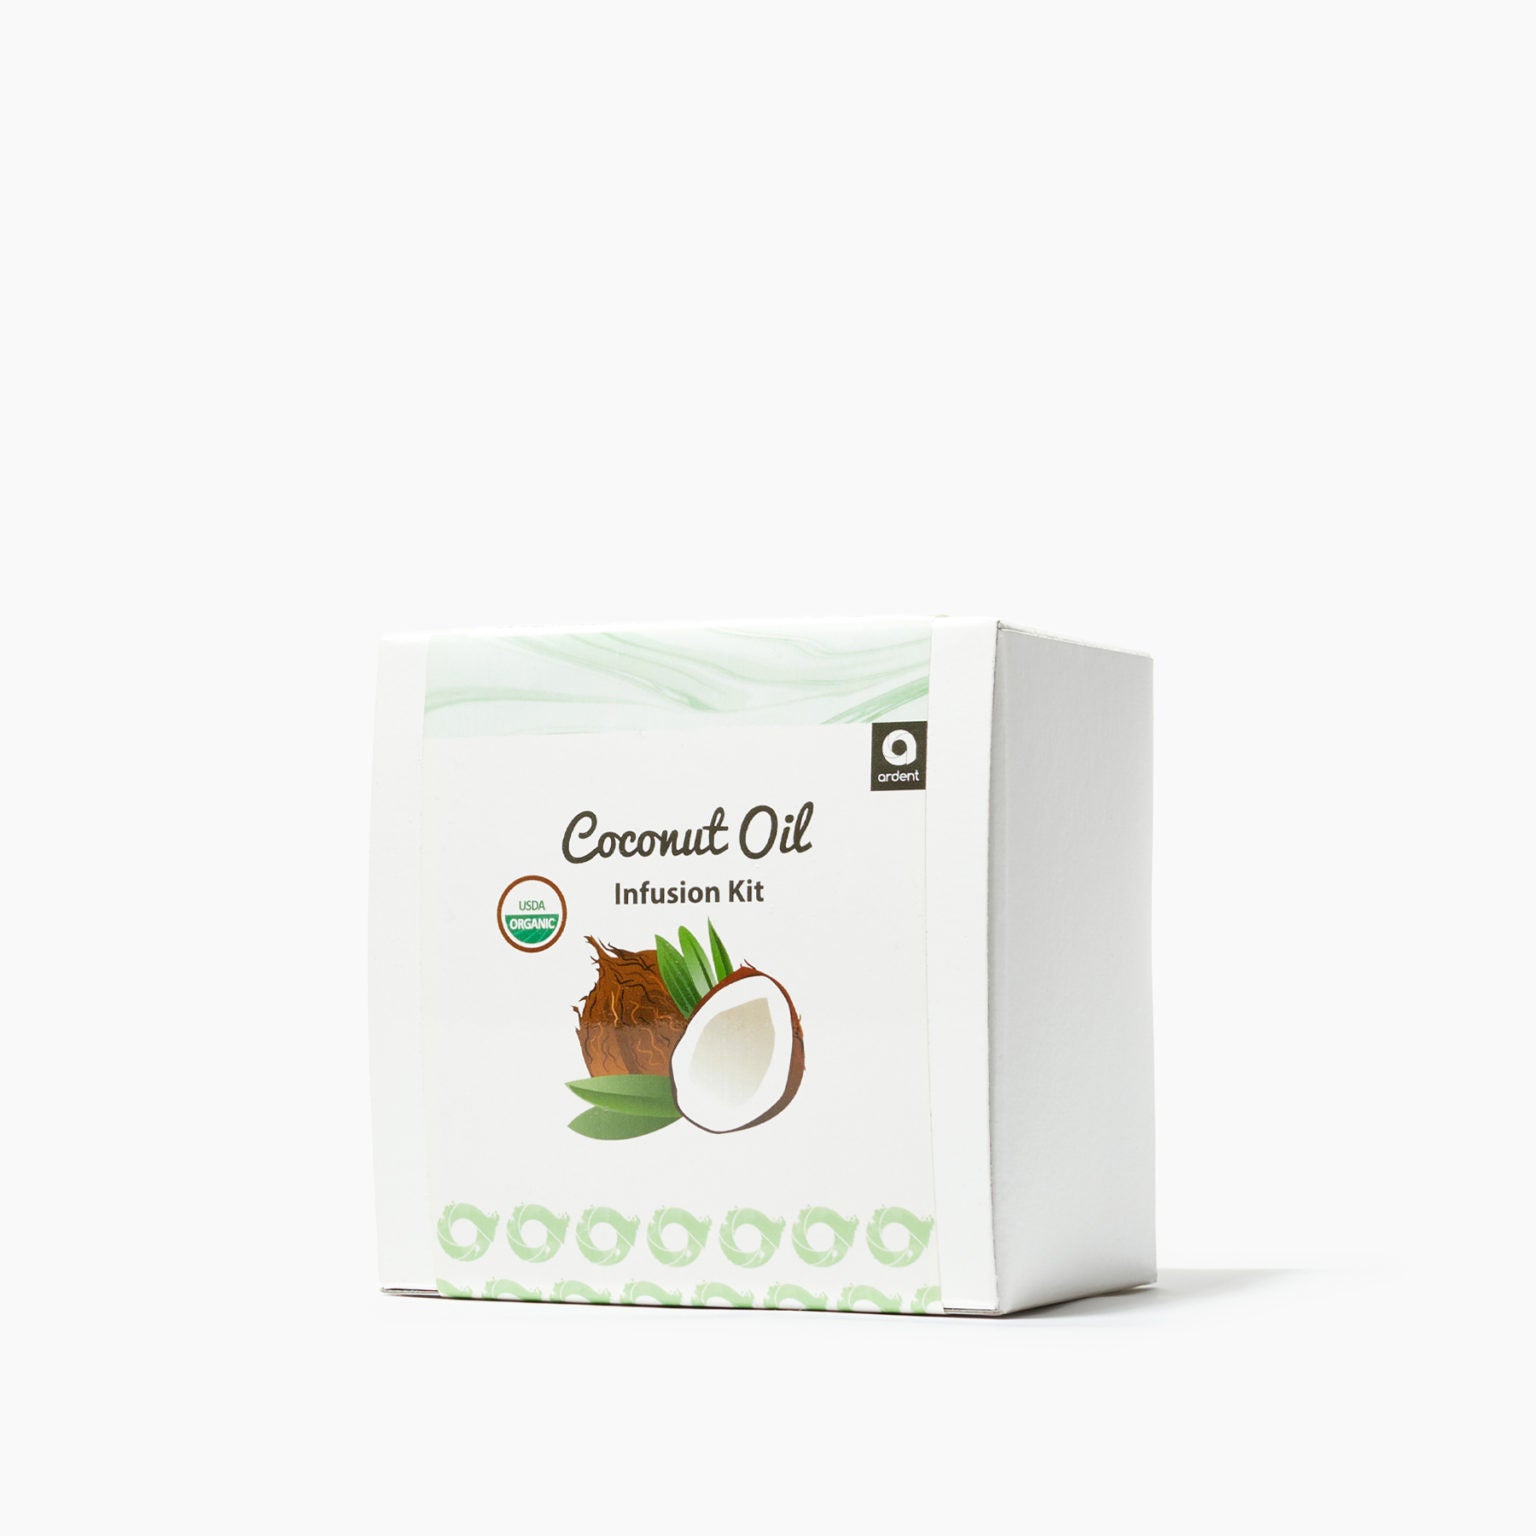 Coconut Oil Infusion Kit